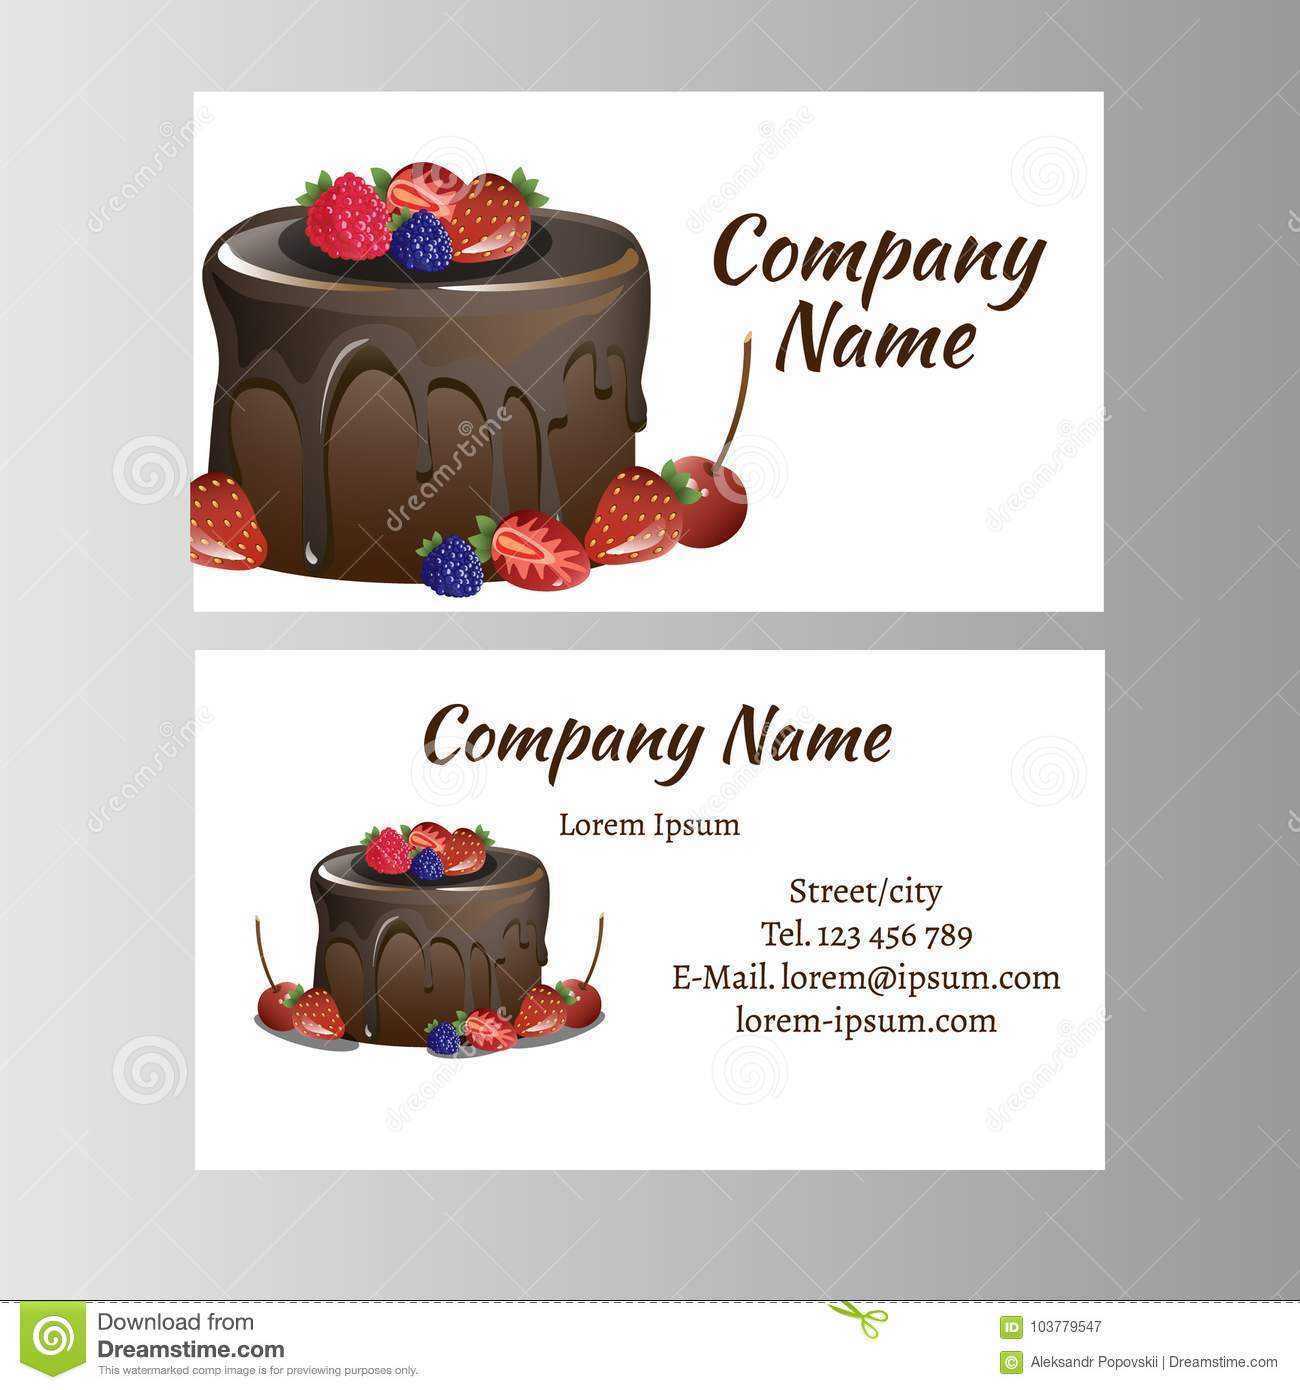 Business Card Template For Bakery Business. Stock Vector Intended For Cake Business Cards Templates Free